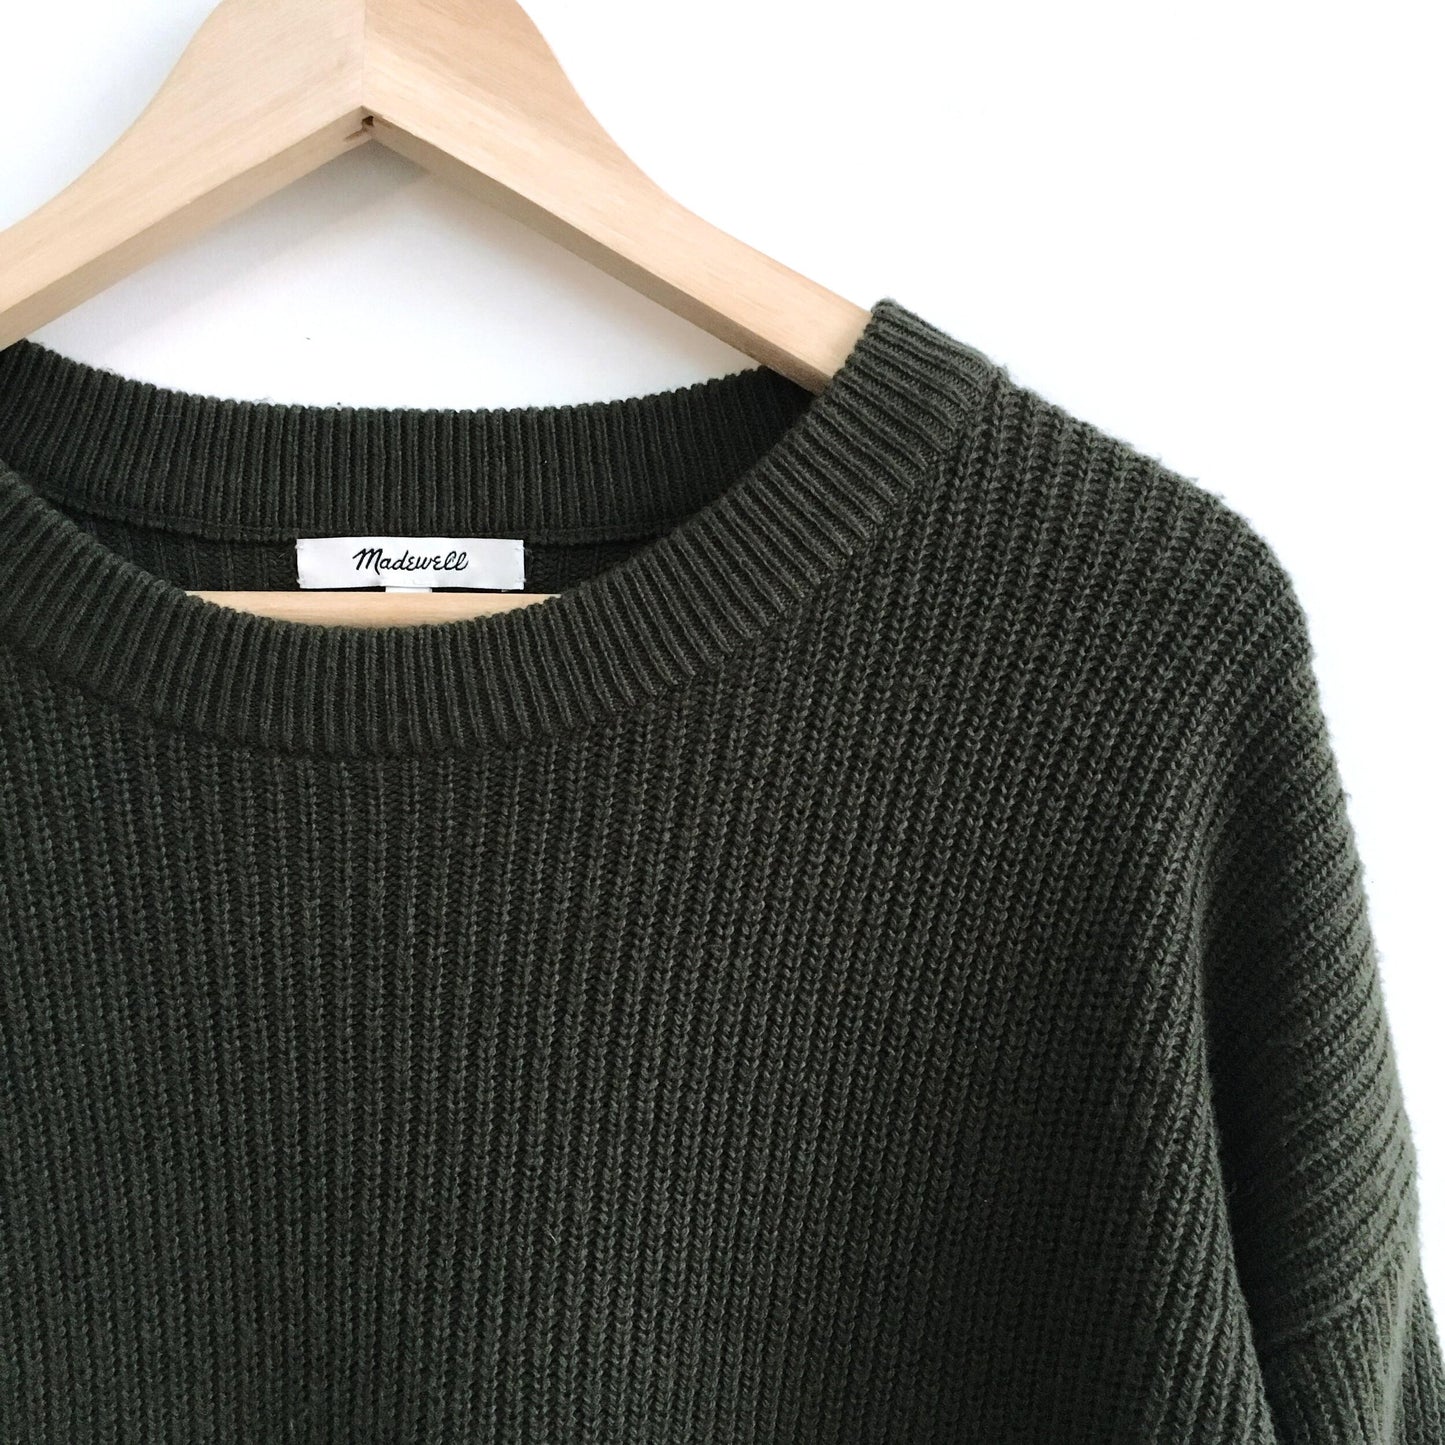 Madewell Patch Pocket Pullover Sweater - size Small